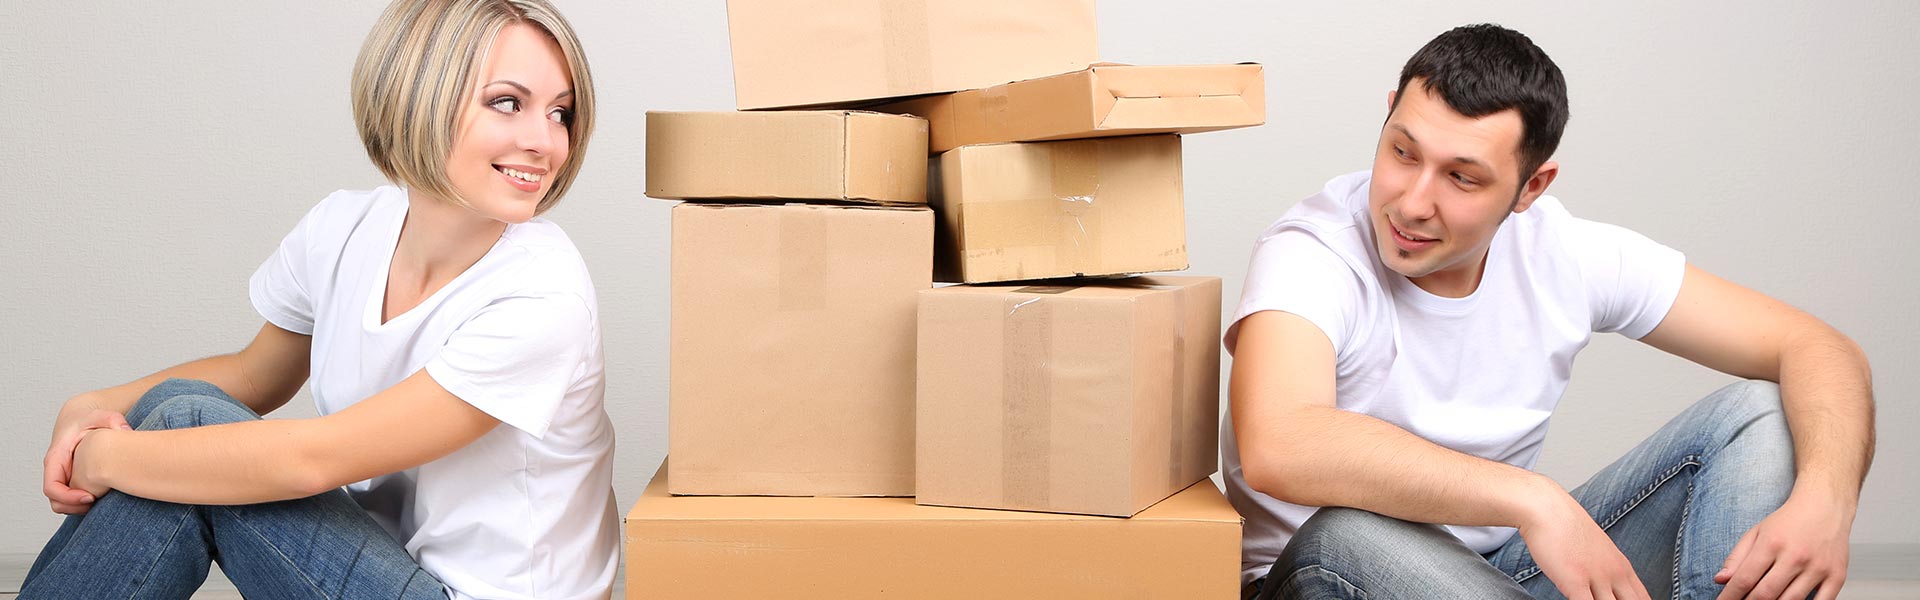 Check Our Professional Removals Services in London Now